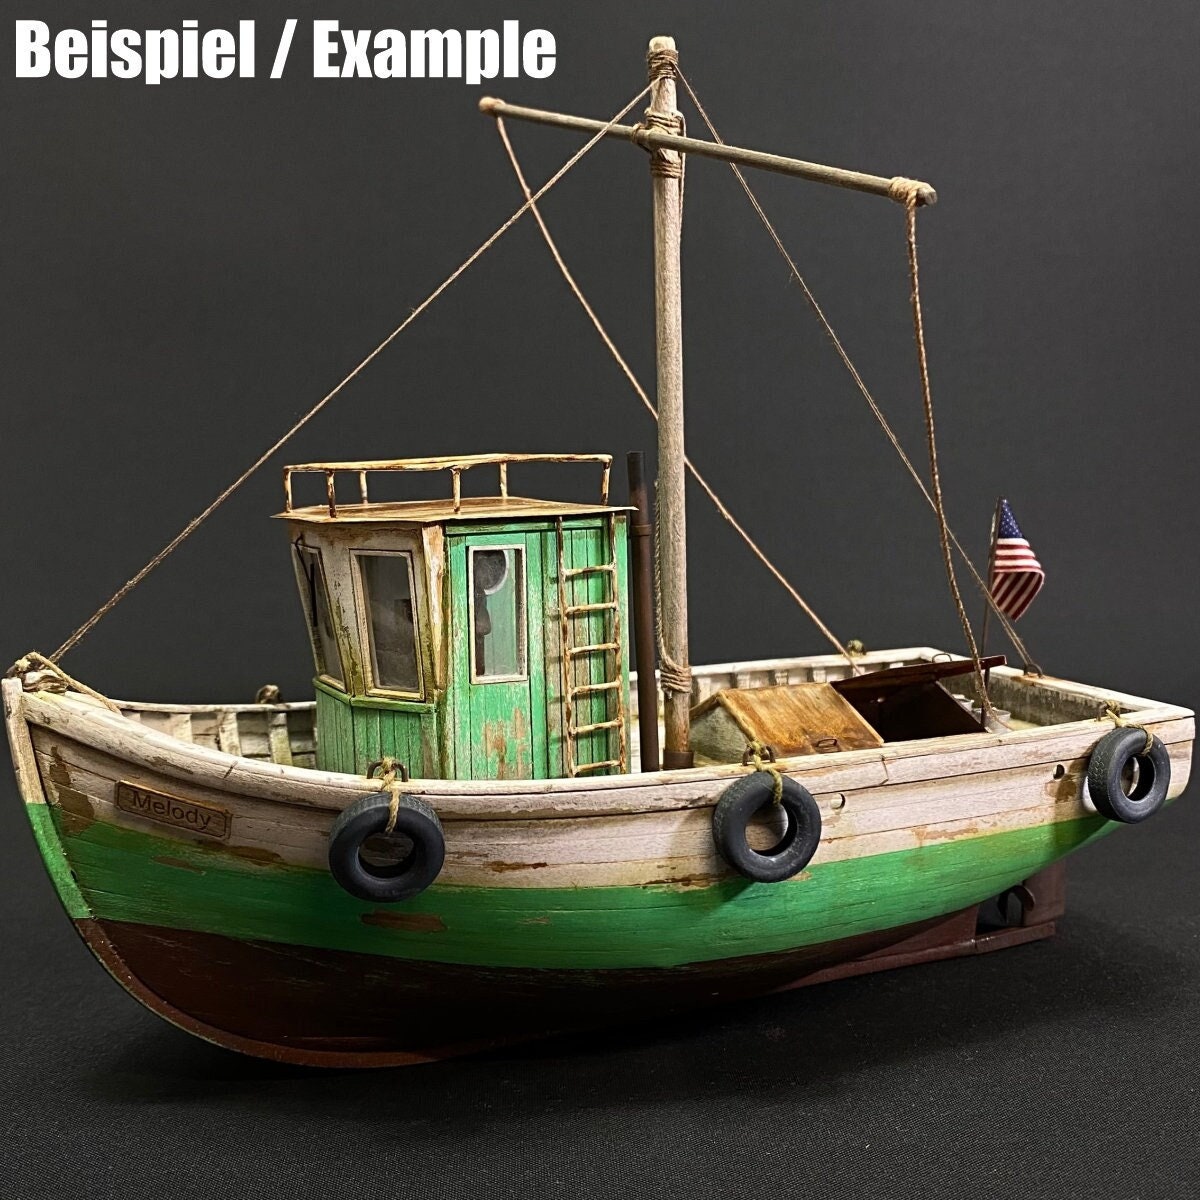 Fishing Boat 1:35 Made of Wood to Build Yourself Laser Cut Model